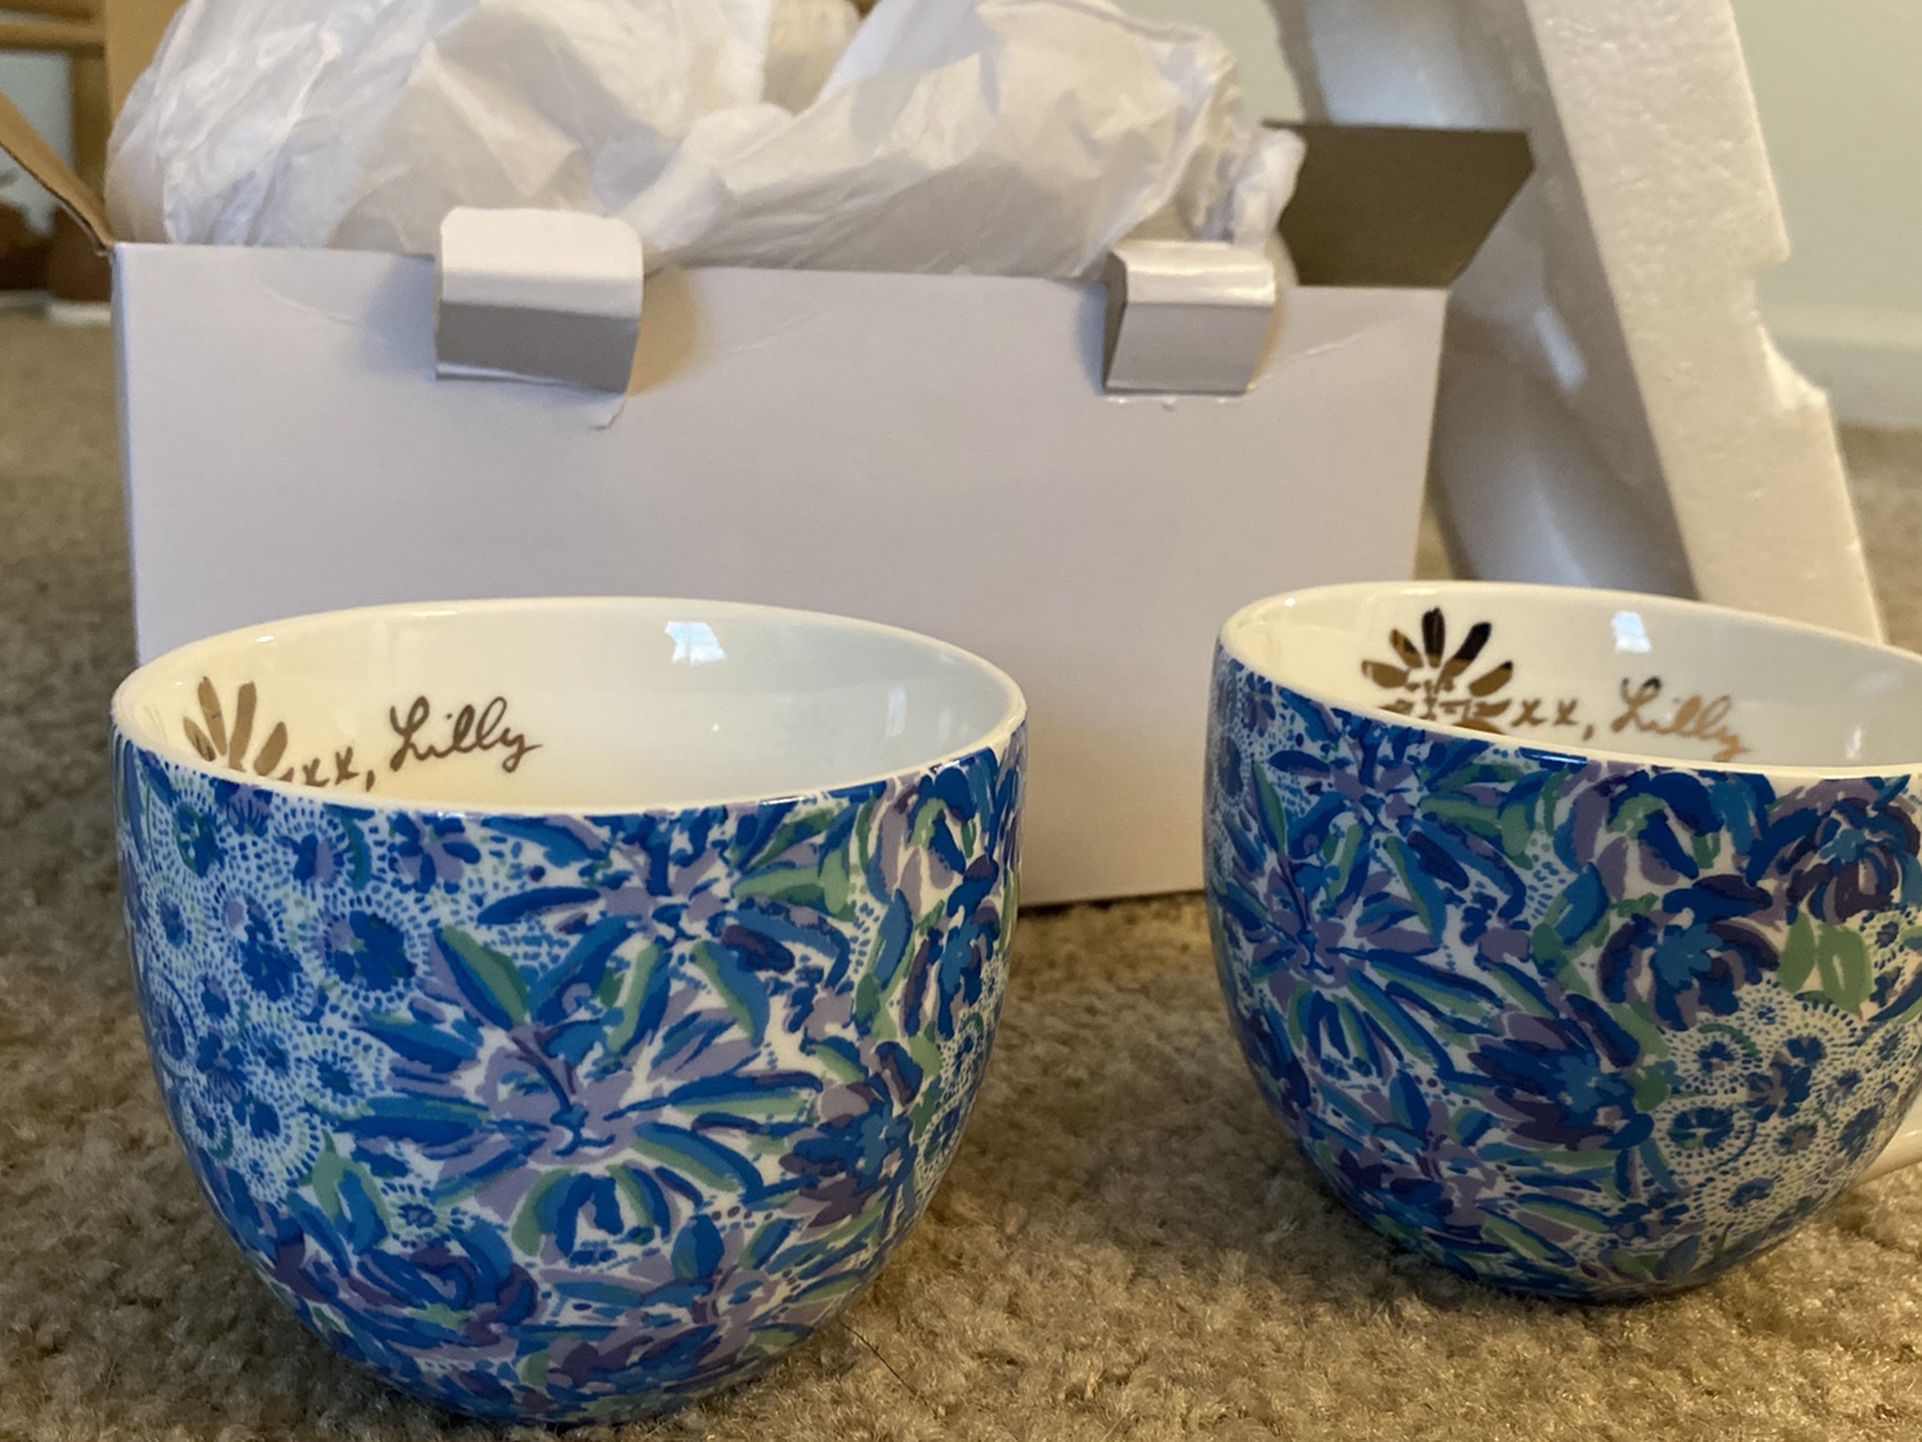 Lilly Pulitzer Set Of 2 Coffee/tea Cups New In Box!